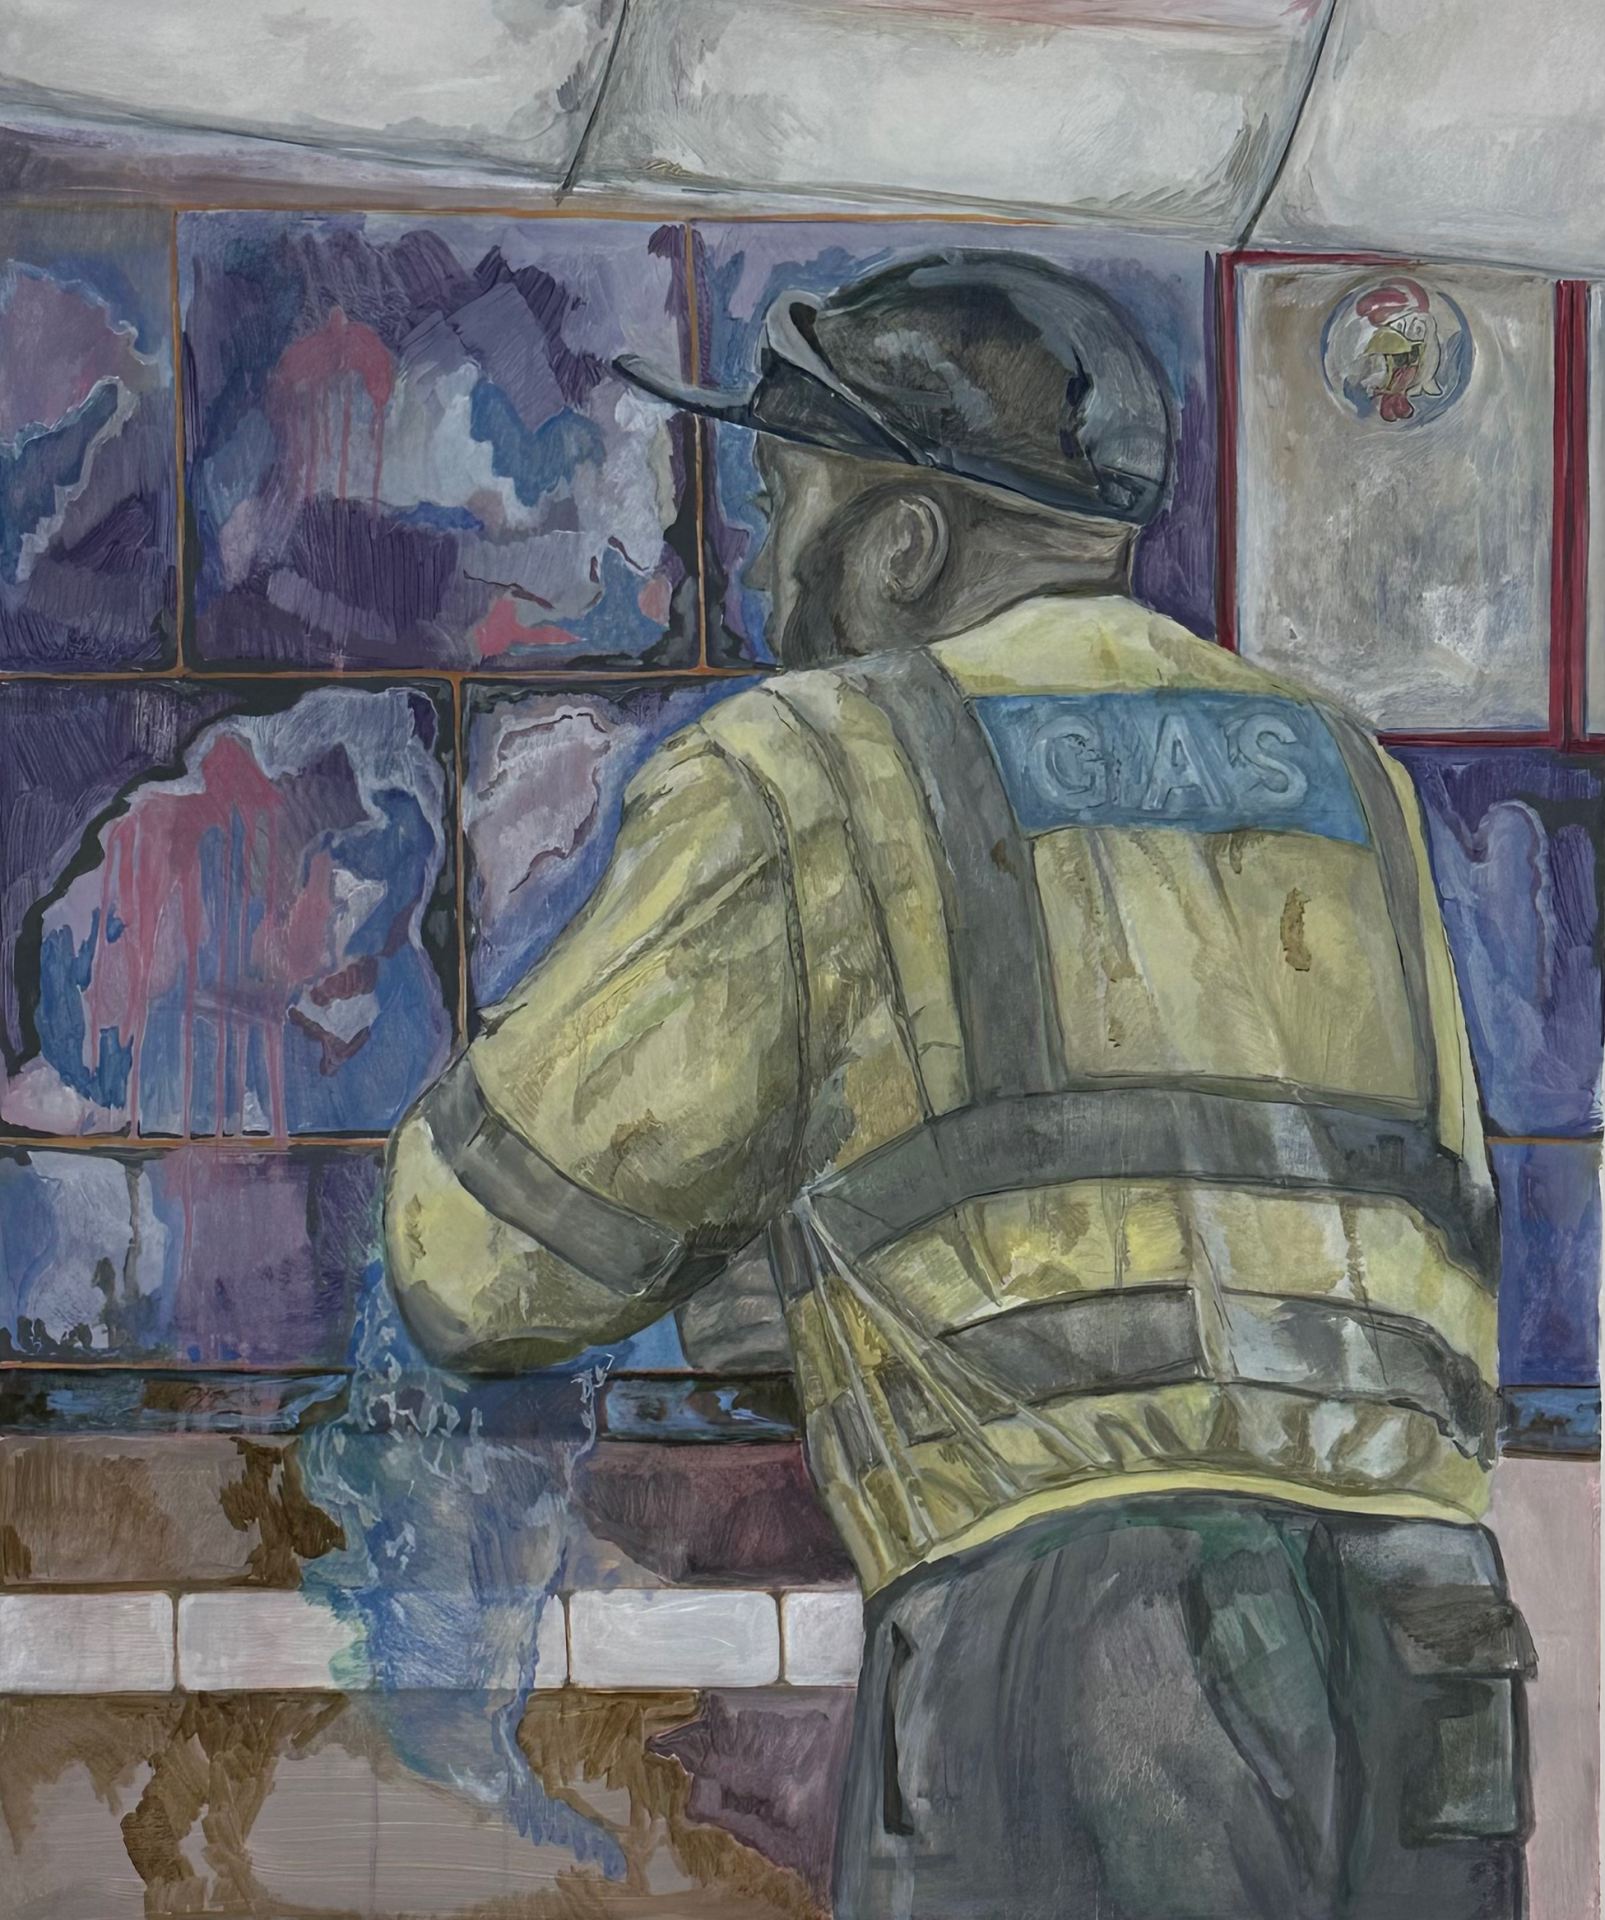 An oil painting of a gas worker in a chicken shop.